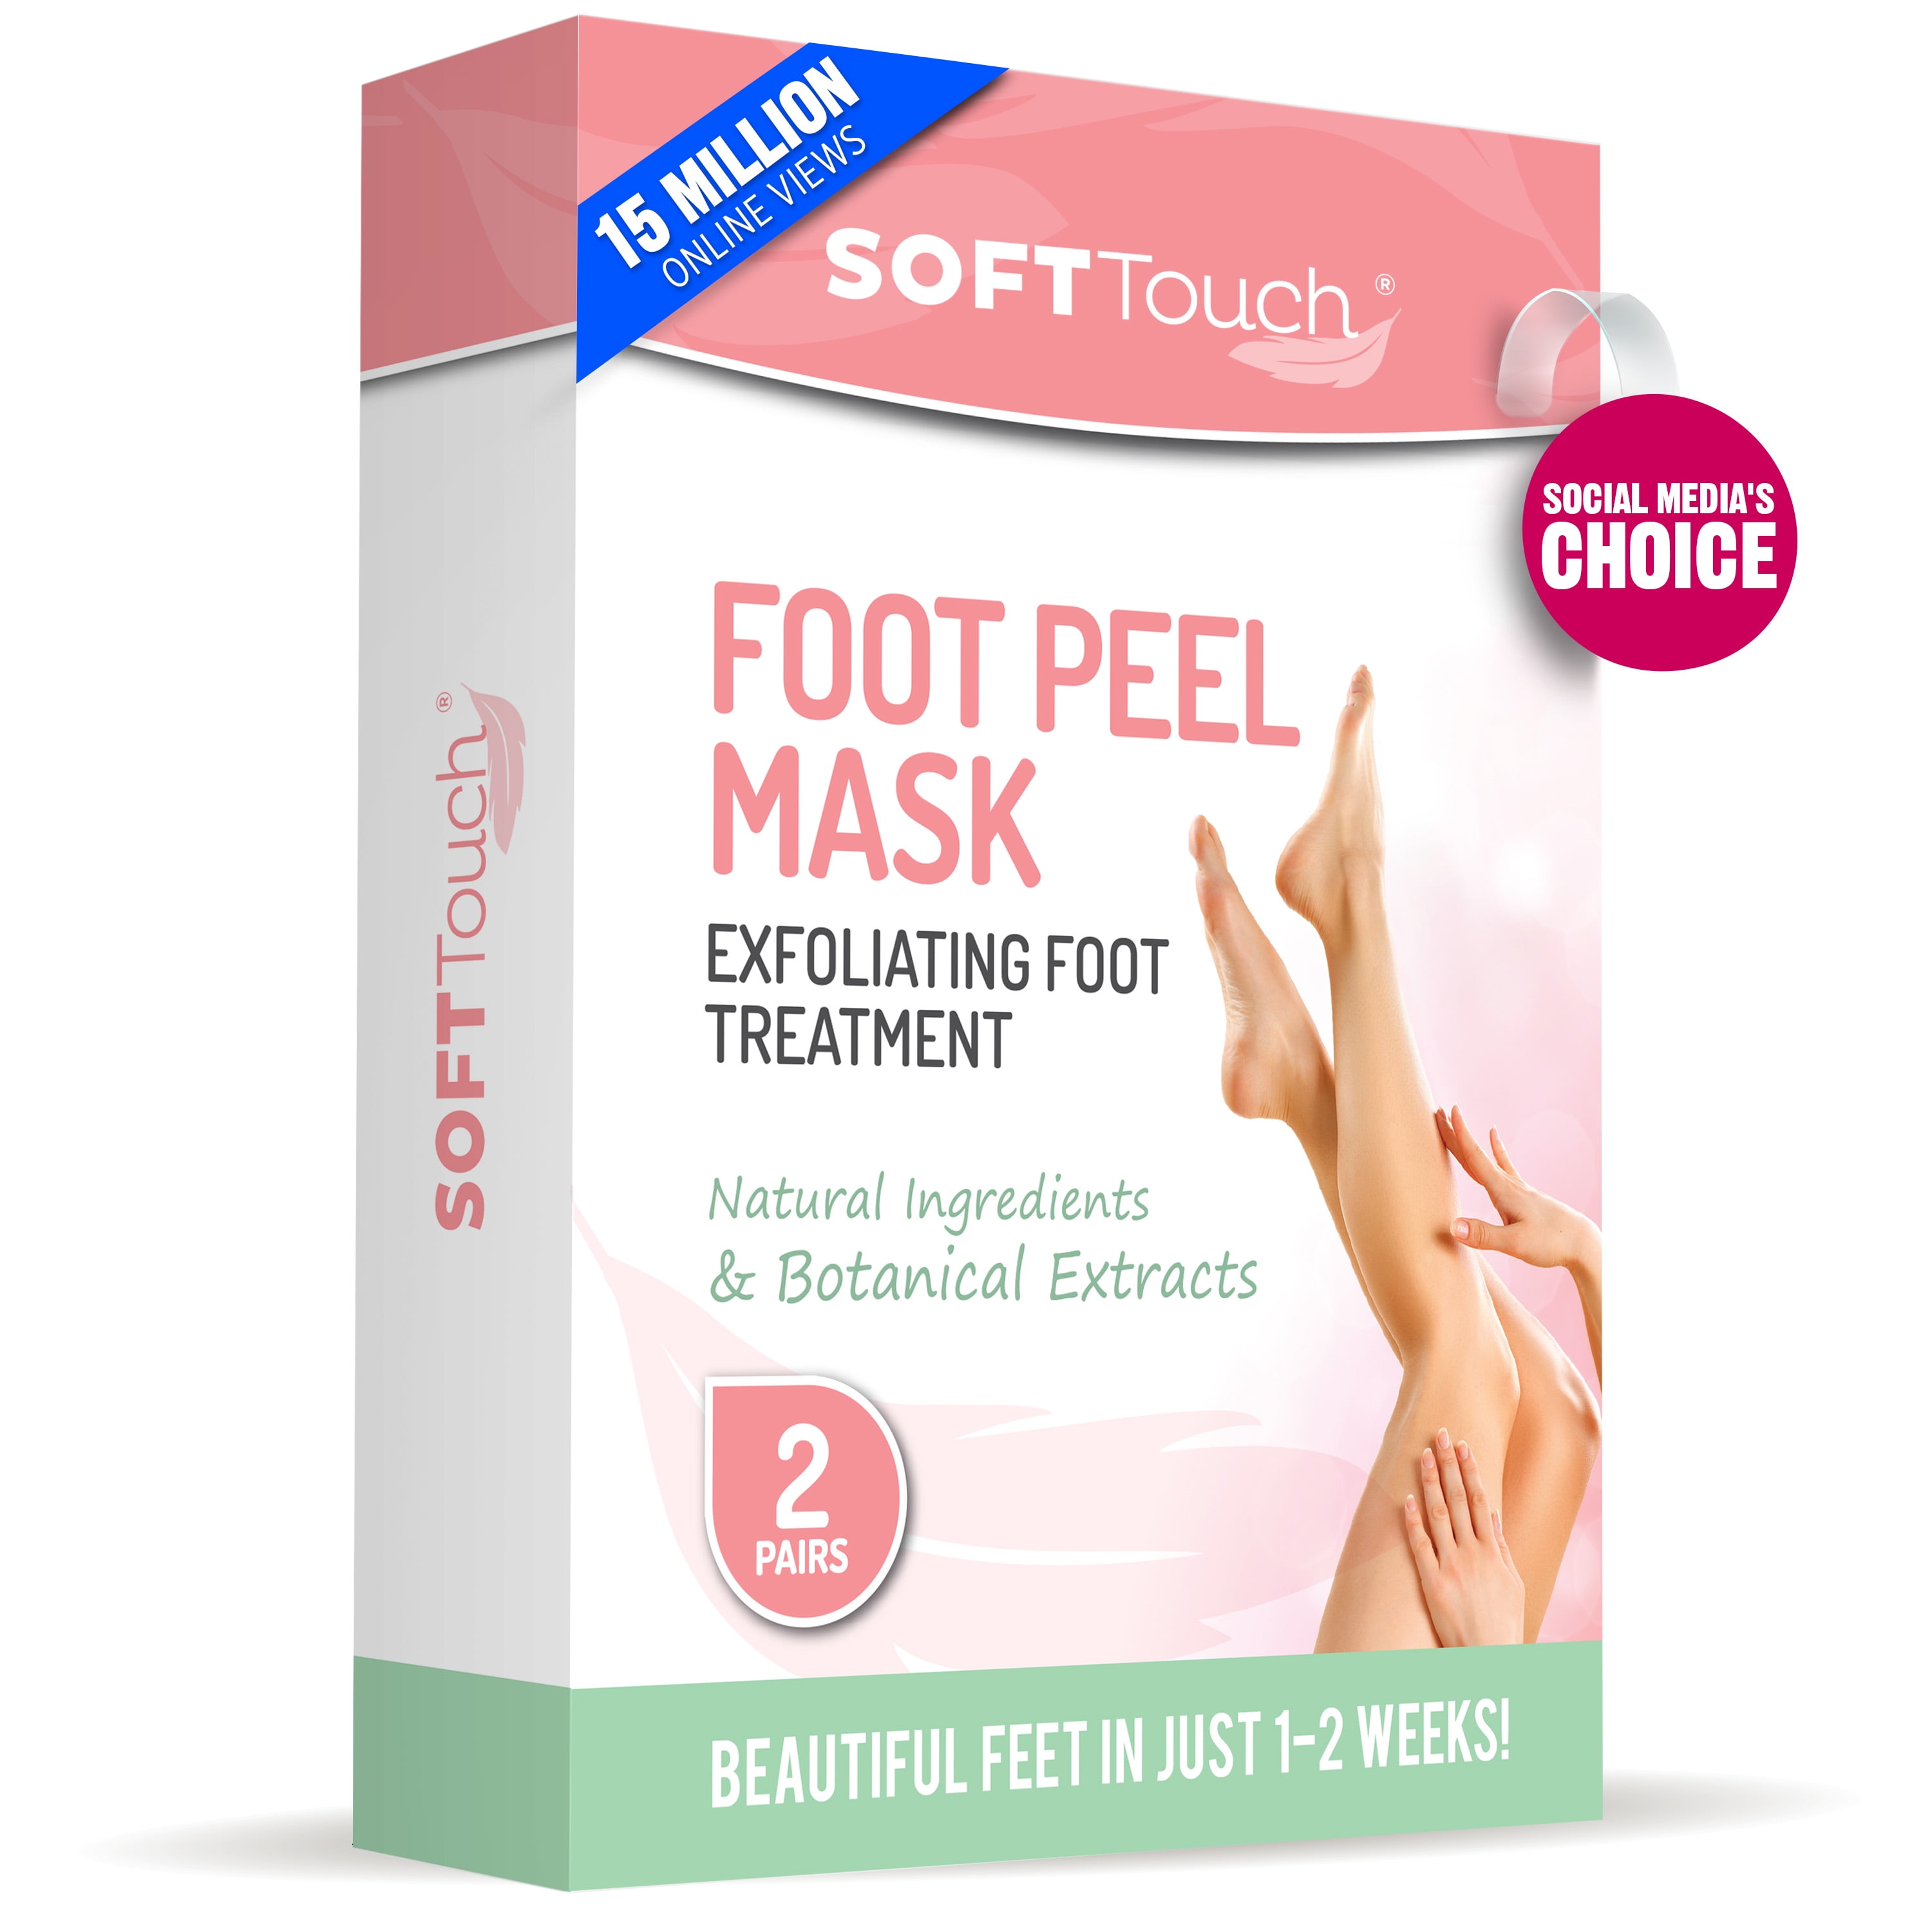 2 Pair Foot Peeling Mask Socks Booties with Natural Oat Extract and Indian Pennywort for Baby Soft Feet Fast in an Easy Use Foot Peel Mask Foot Peeling Mask by Eclat 